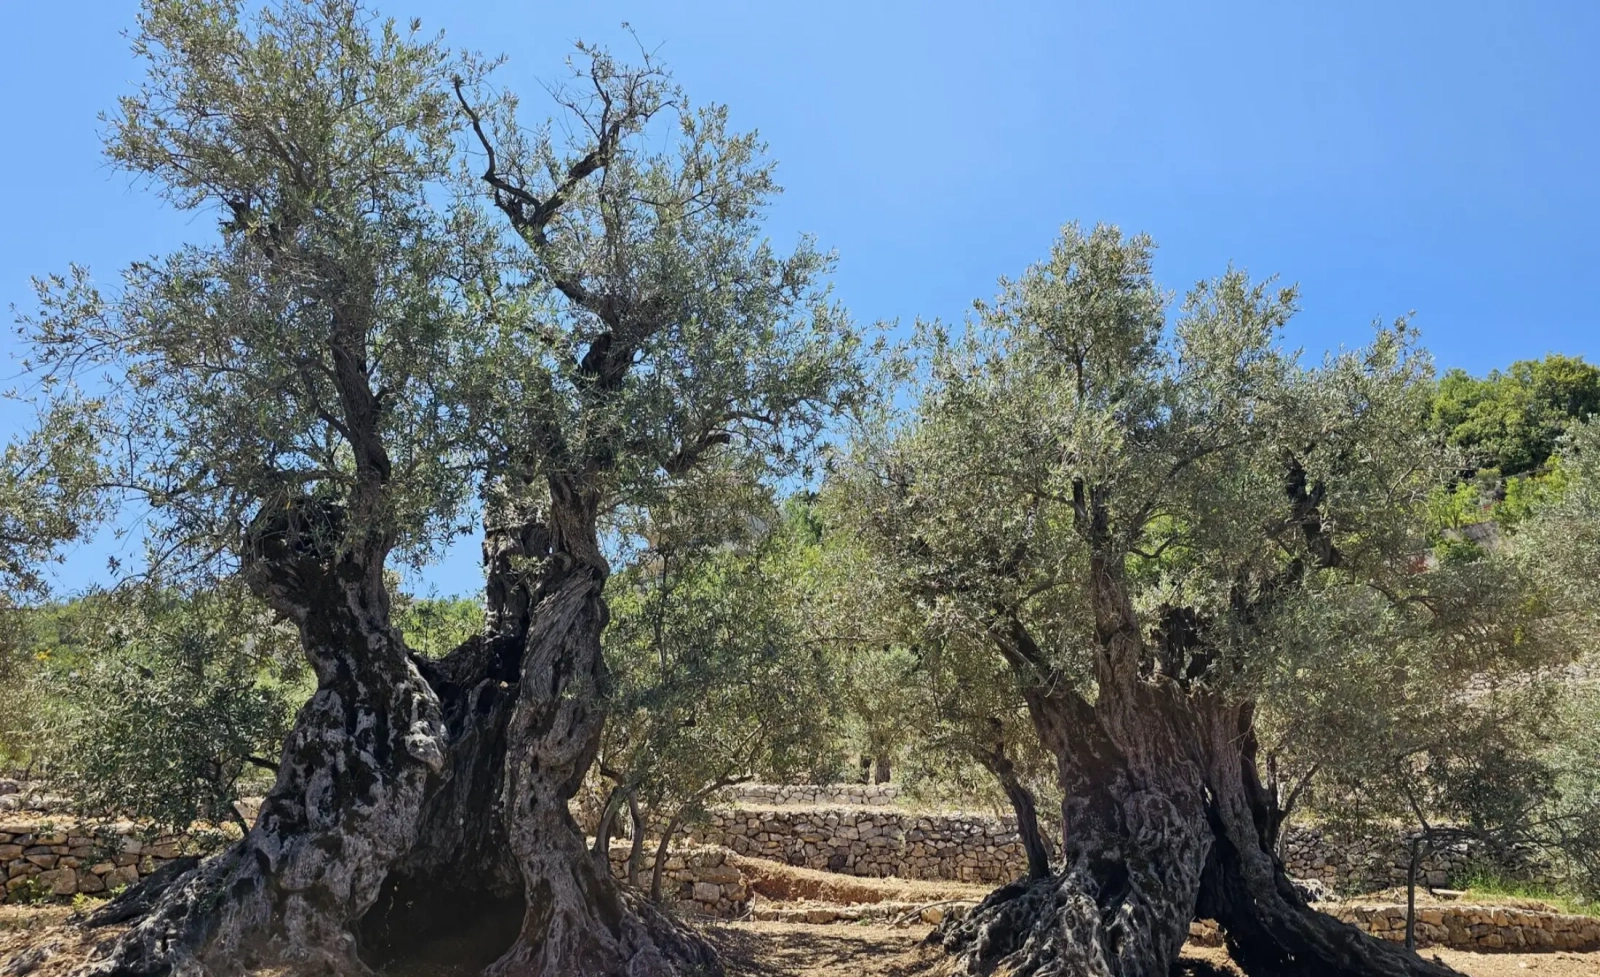 Bchaaleh LMT Side Trail: Noah’s Olives Trail, From Baloue Bataara to Bchaaleh village